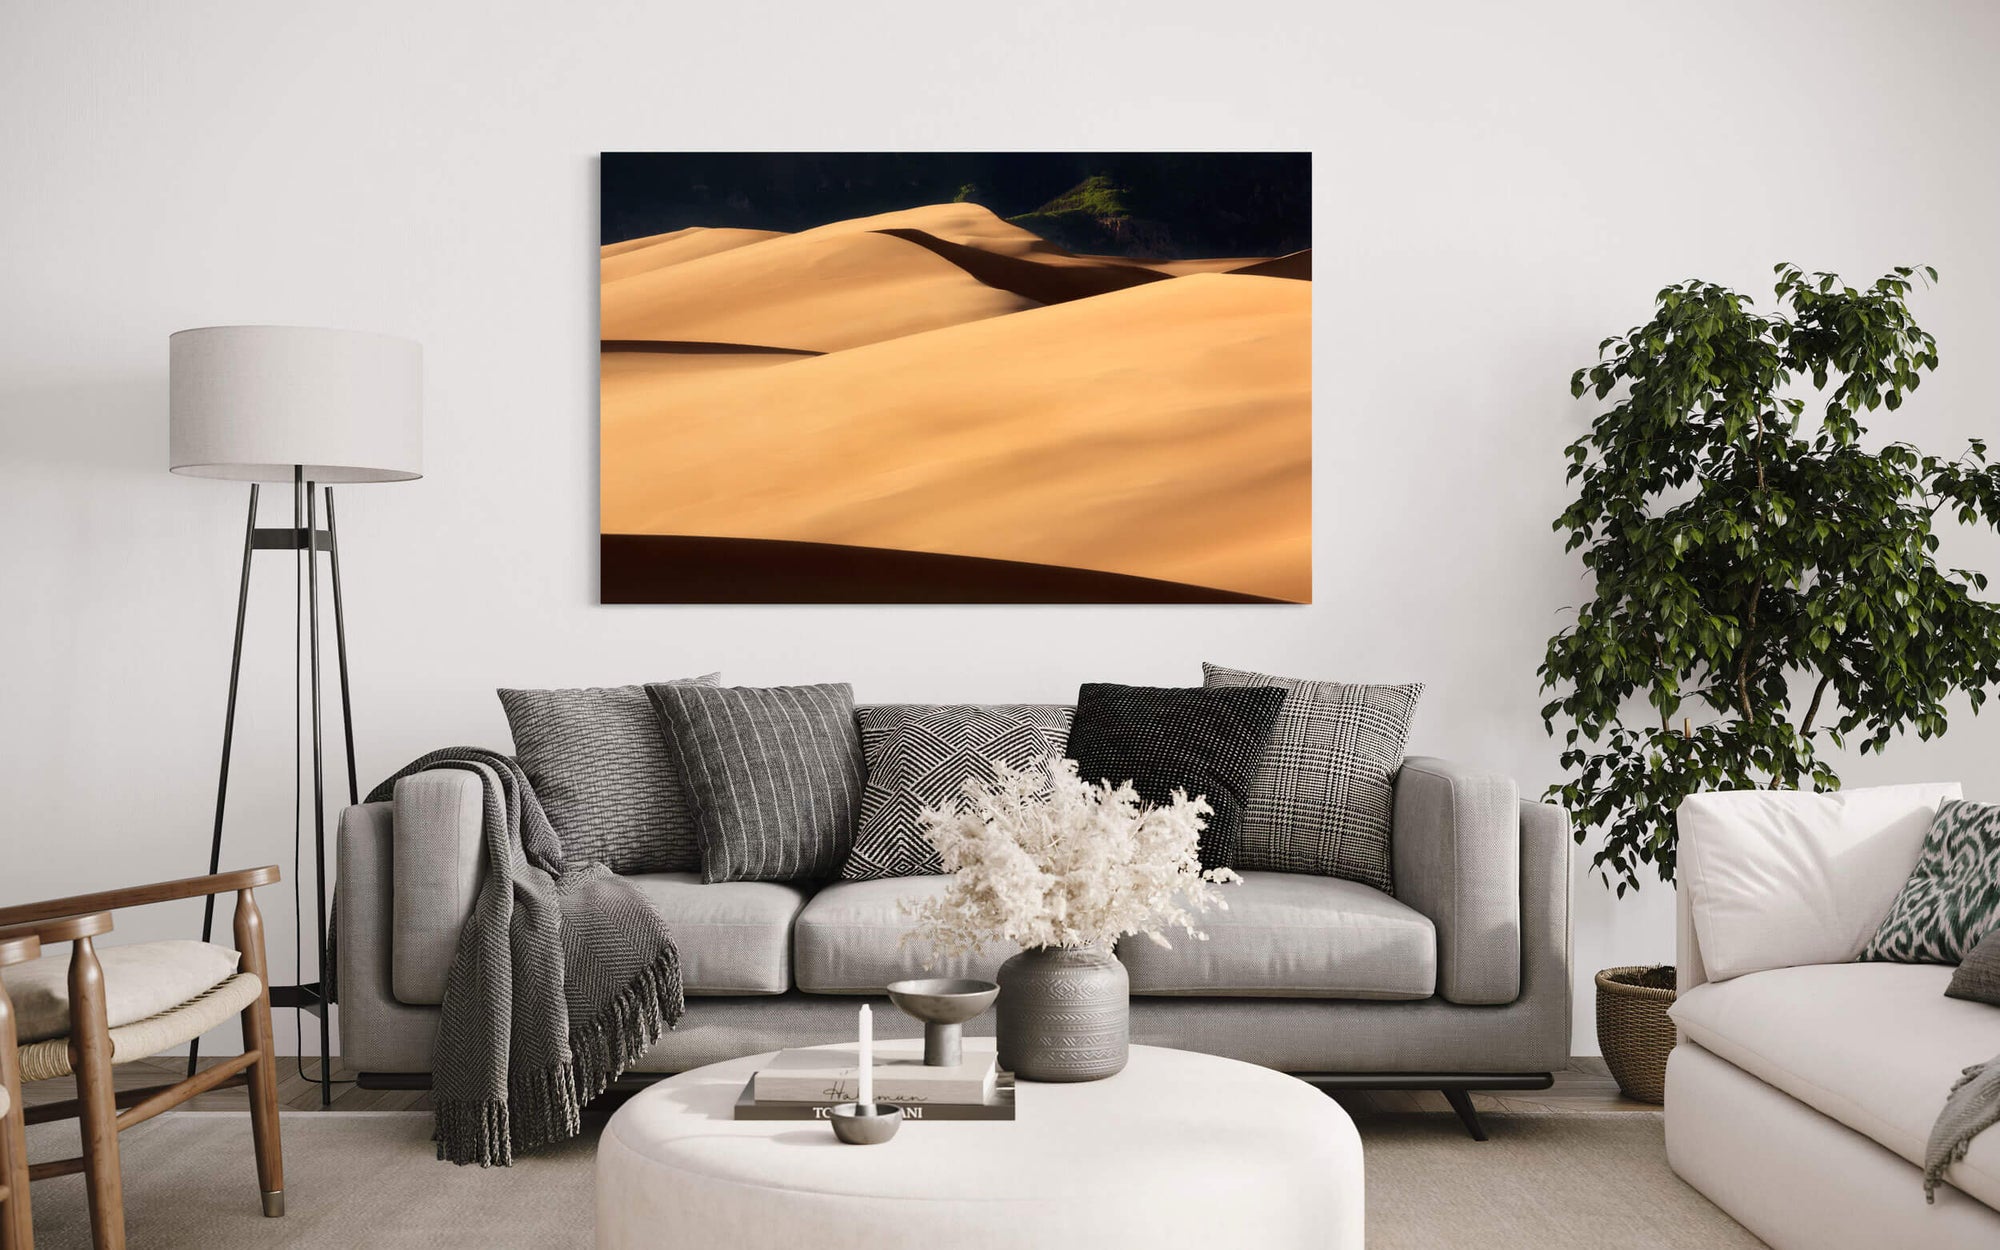 A piece of Colorado art showing a Great Sand Dunes National Park picture hangs in a living room.